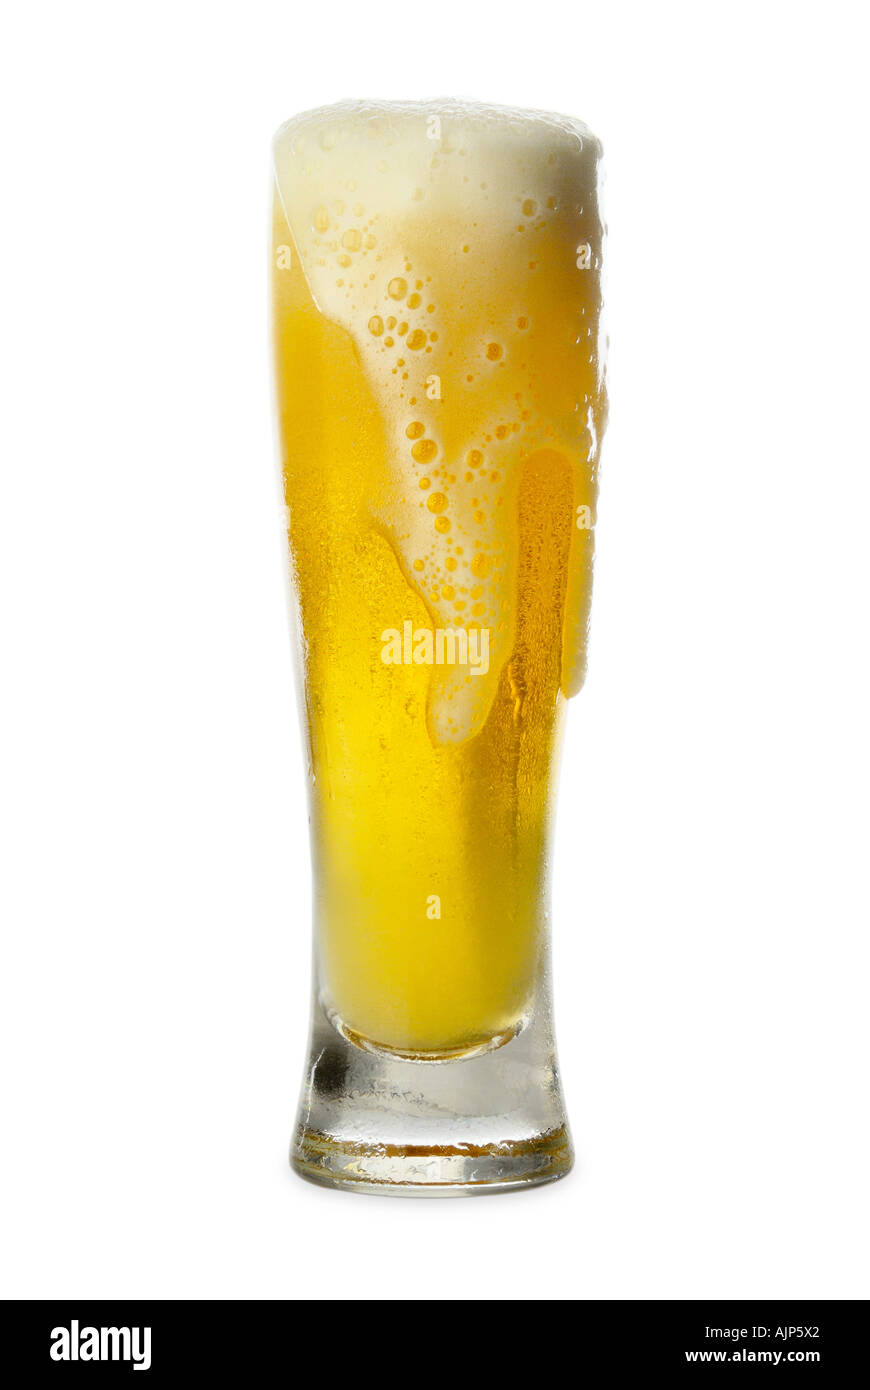 BEER PILSNER GLASS OF AMBER BEER SILHOUETTED ON WHITE BACKGROUND Stock Photo